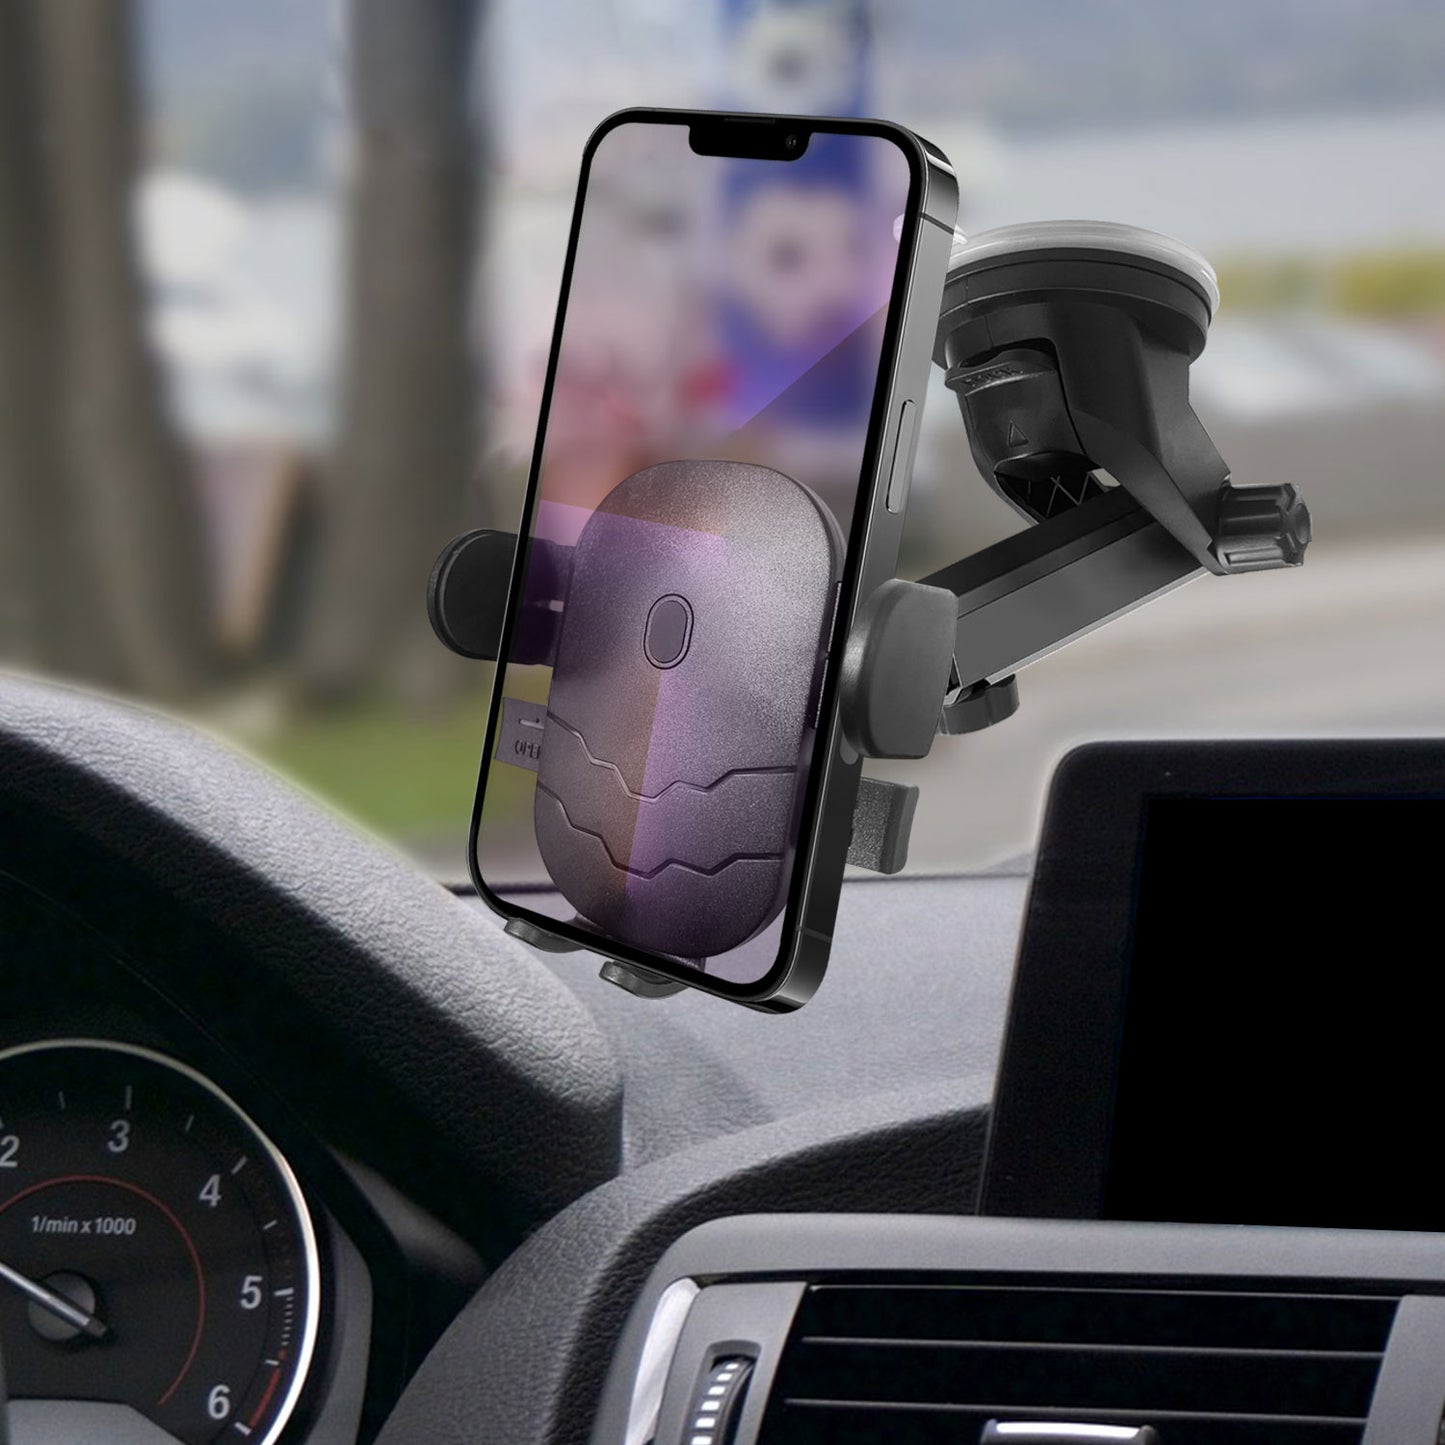 PH180 - Dashboard Phone Mount, Reusable Suction Cup Dashboard Phone Holder with 360 Degree Rotation and Extendable 270 Degree Arm